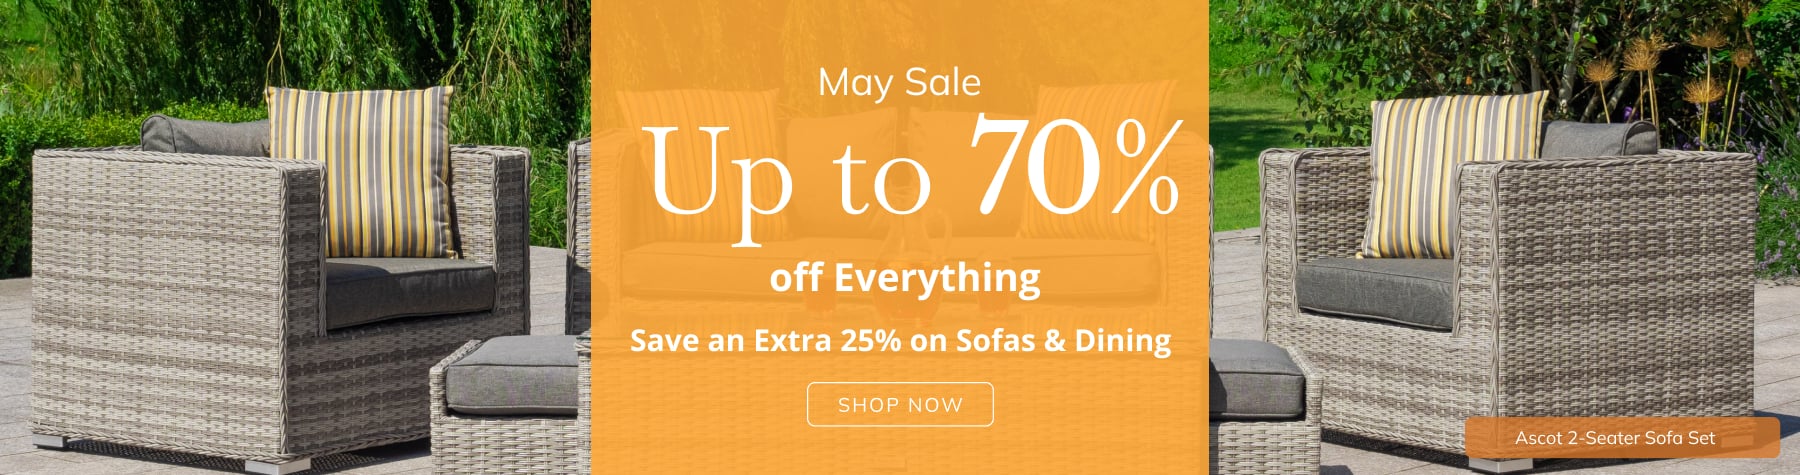 May Sale Up to 70% off Everything